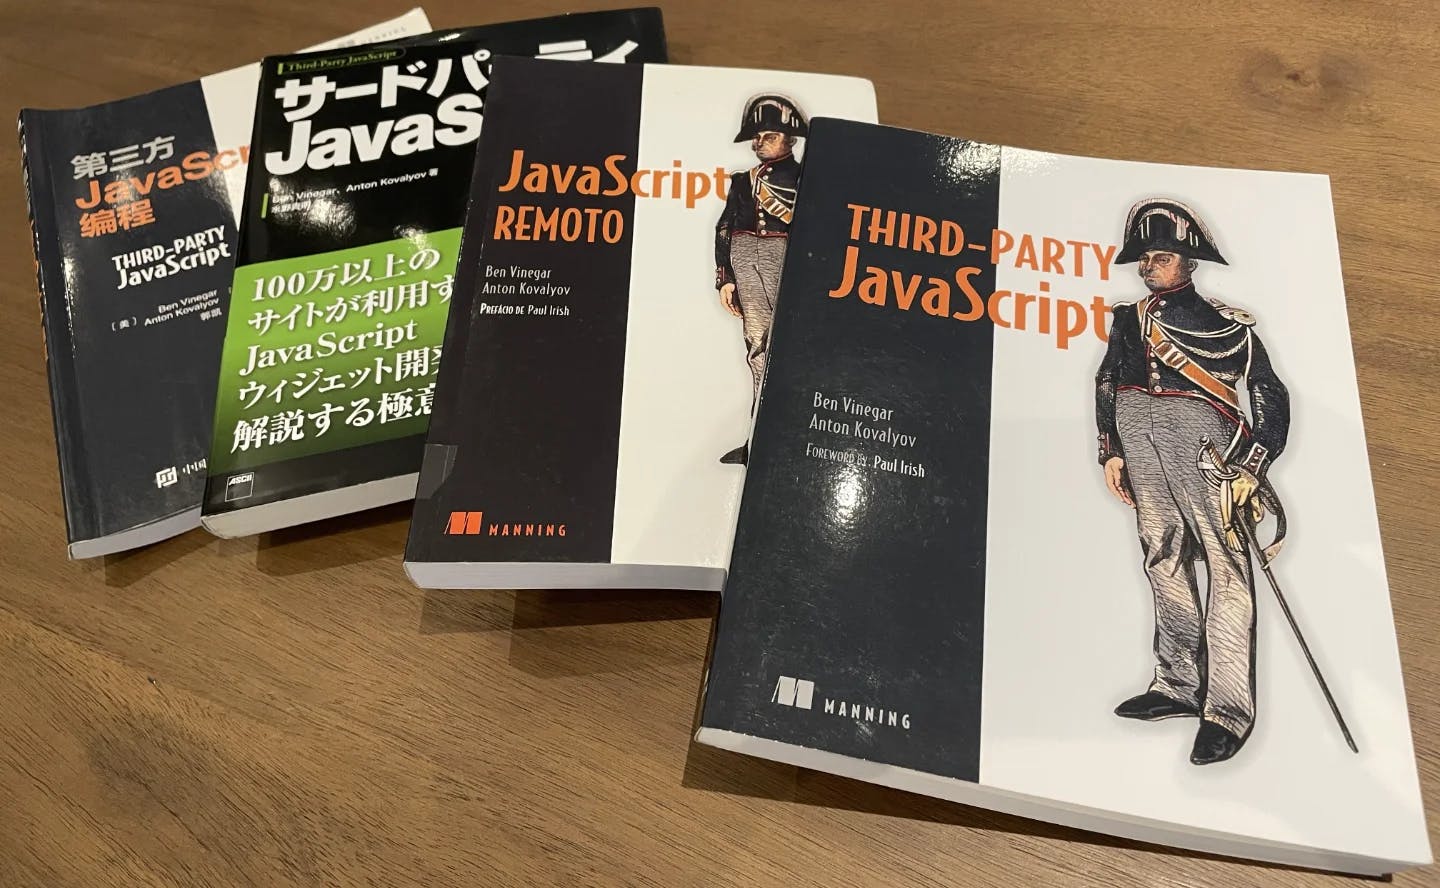 The Story of Third-party JavaScript